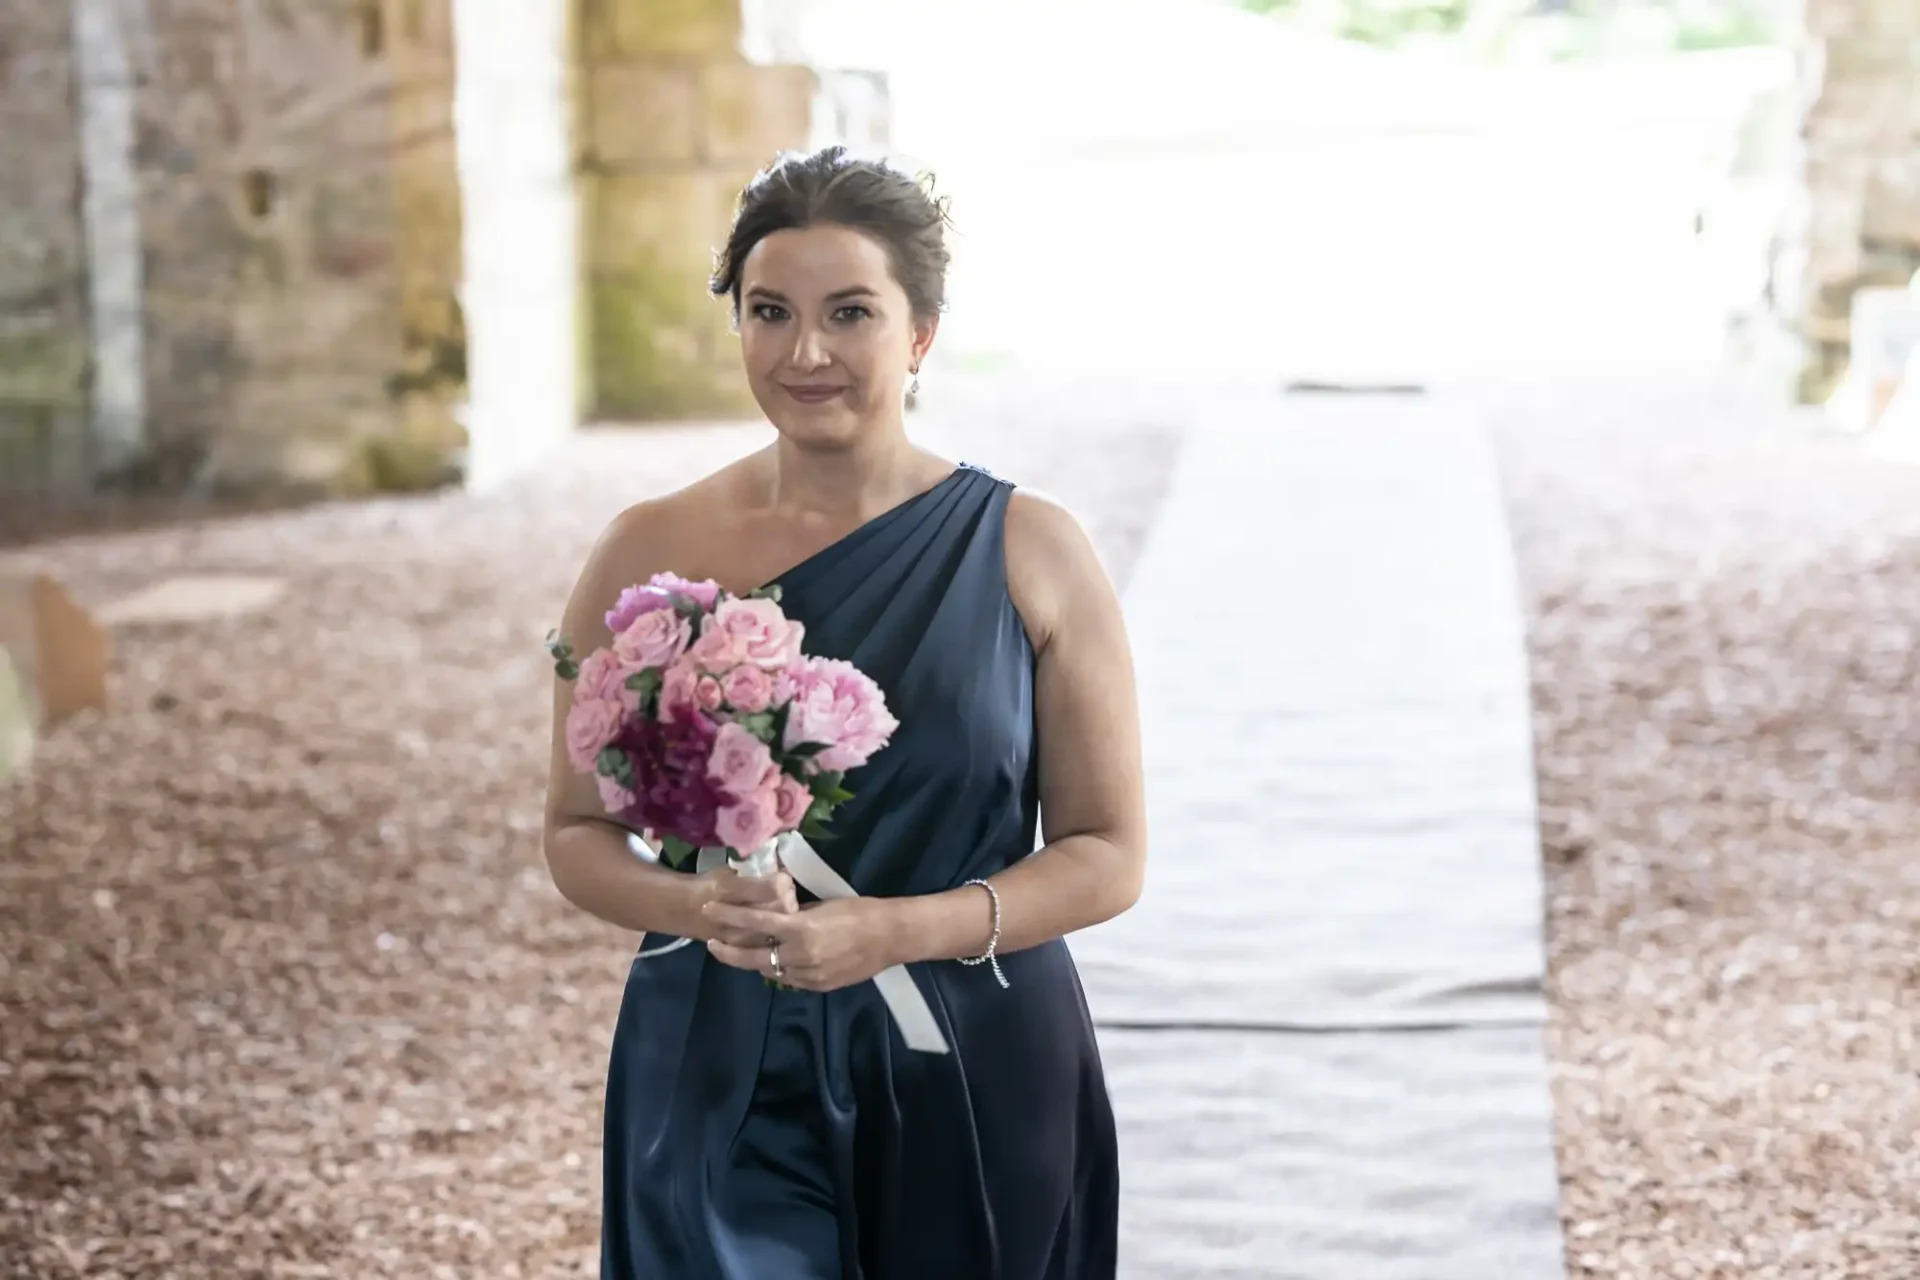 A woman in a navy blue dress holding a bouquet of pink flowers walks down a covered path with a serene expression.